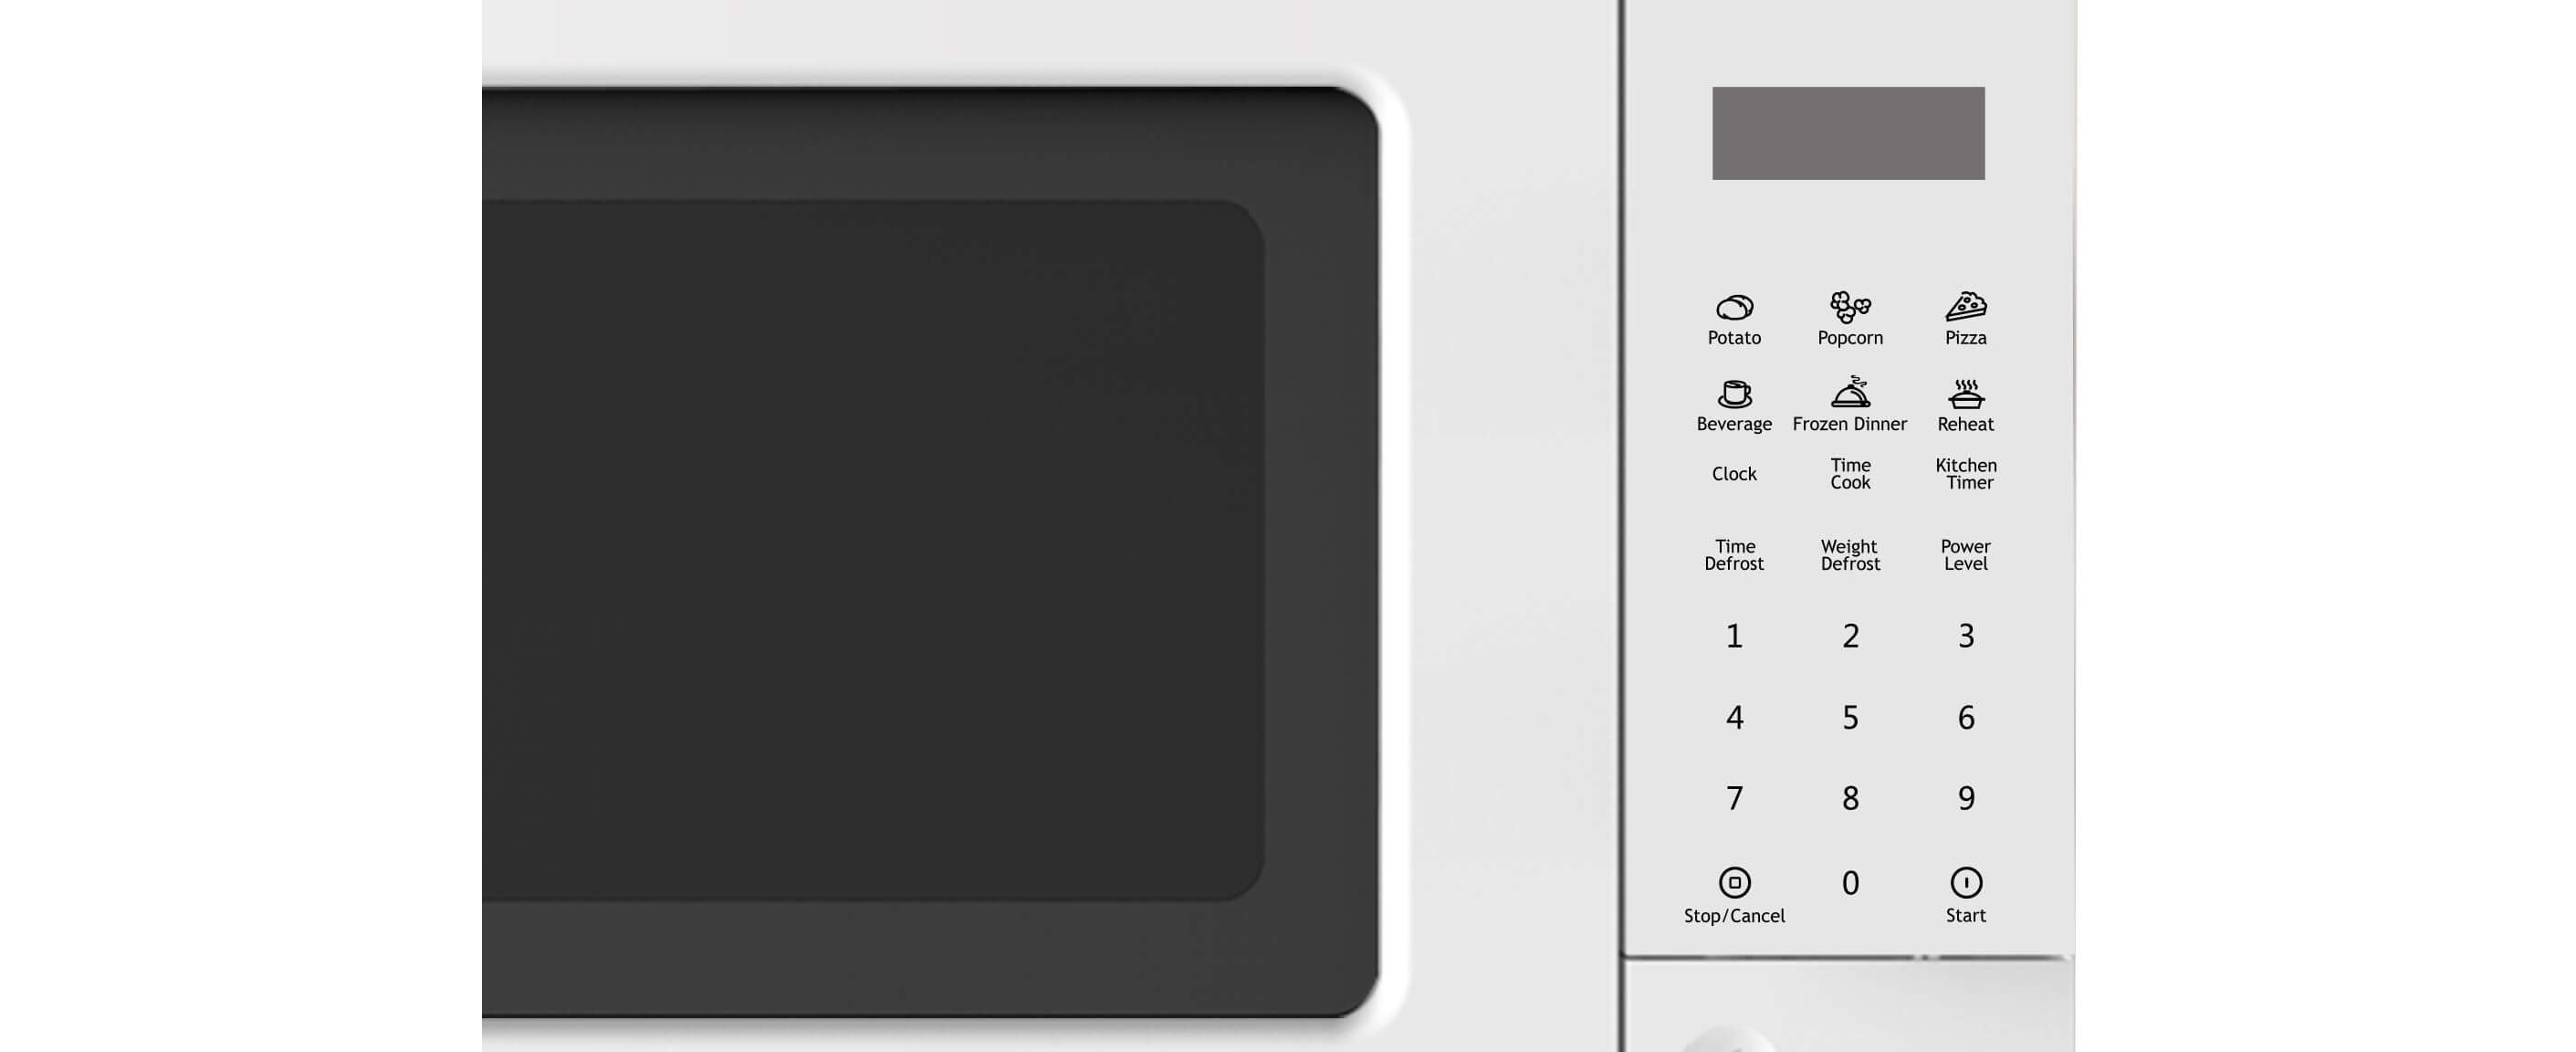 Smad Digital Microwave Oven with LED display